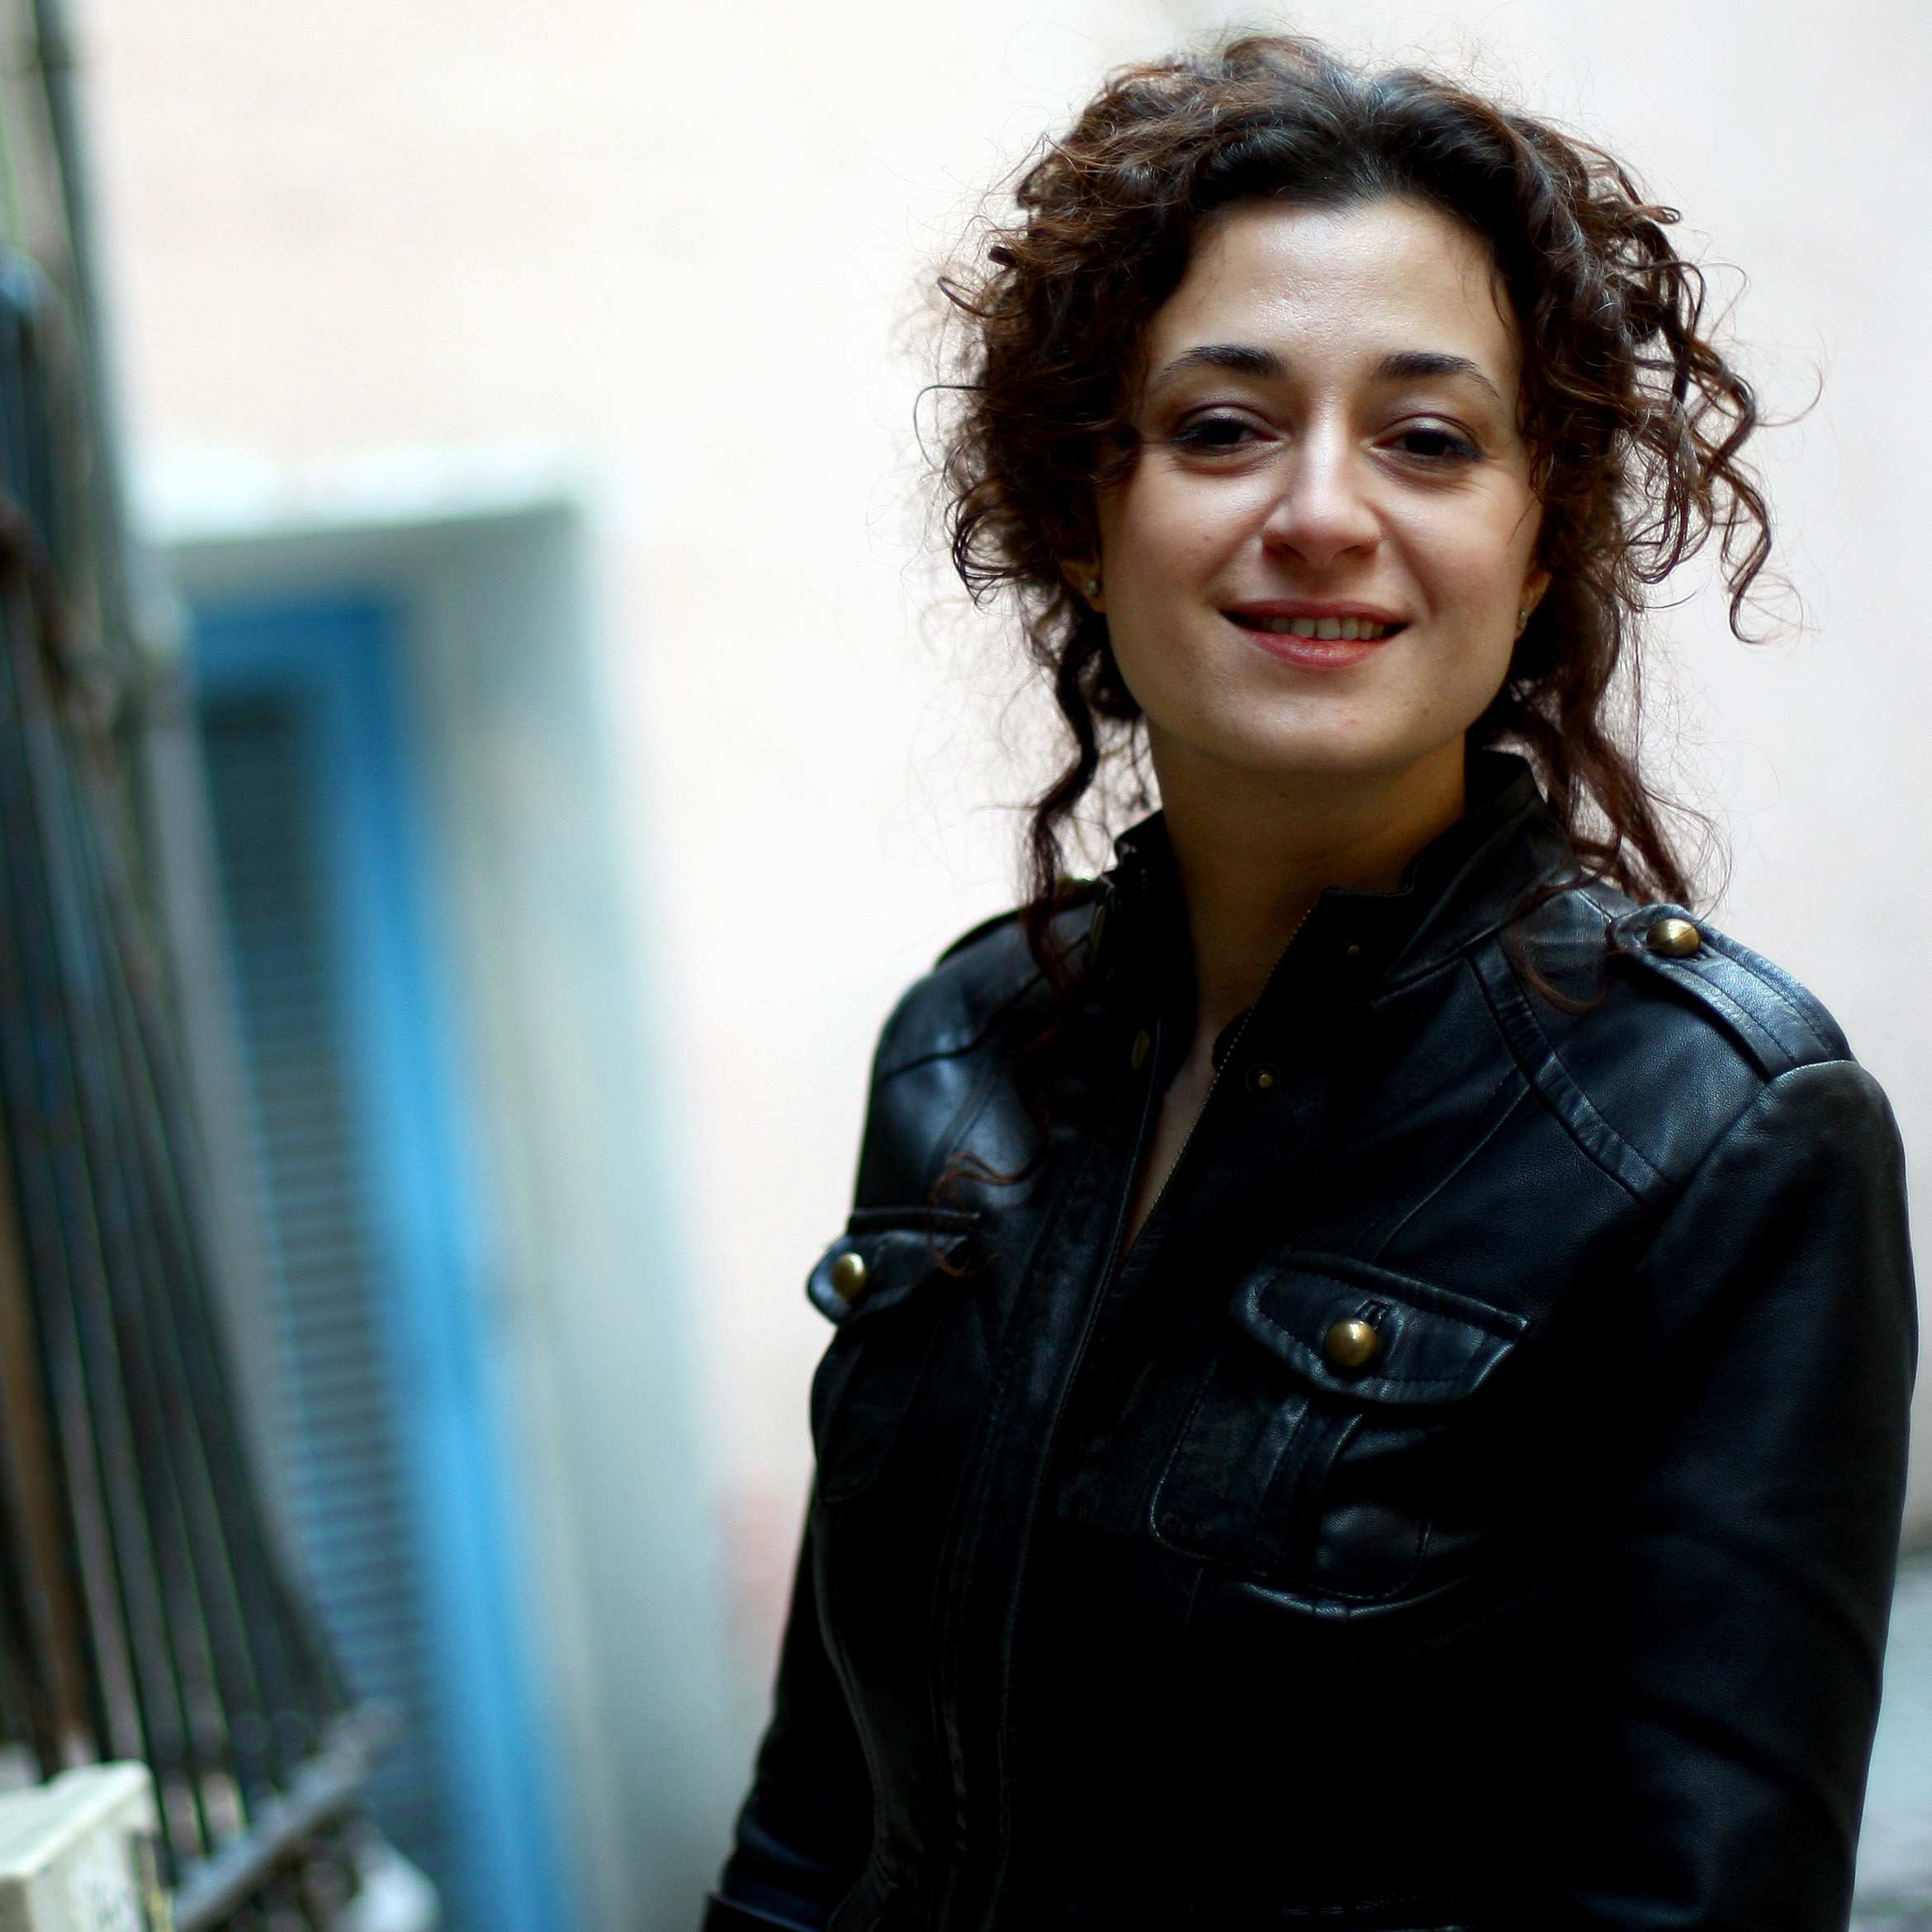 20 Sep: Author Ece Temelkuran on the struggles that have shaped Turkey